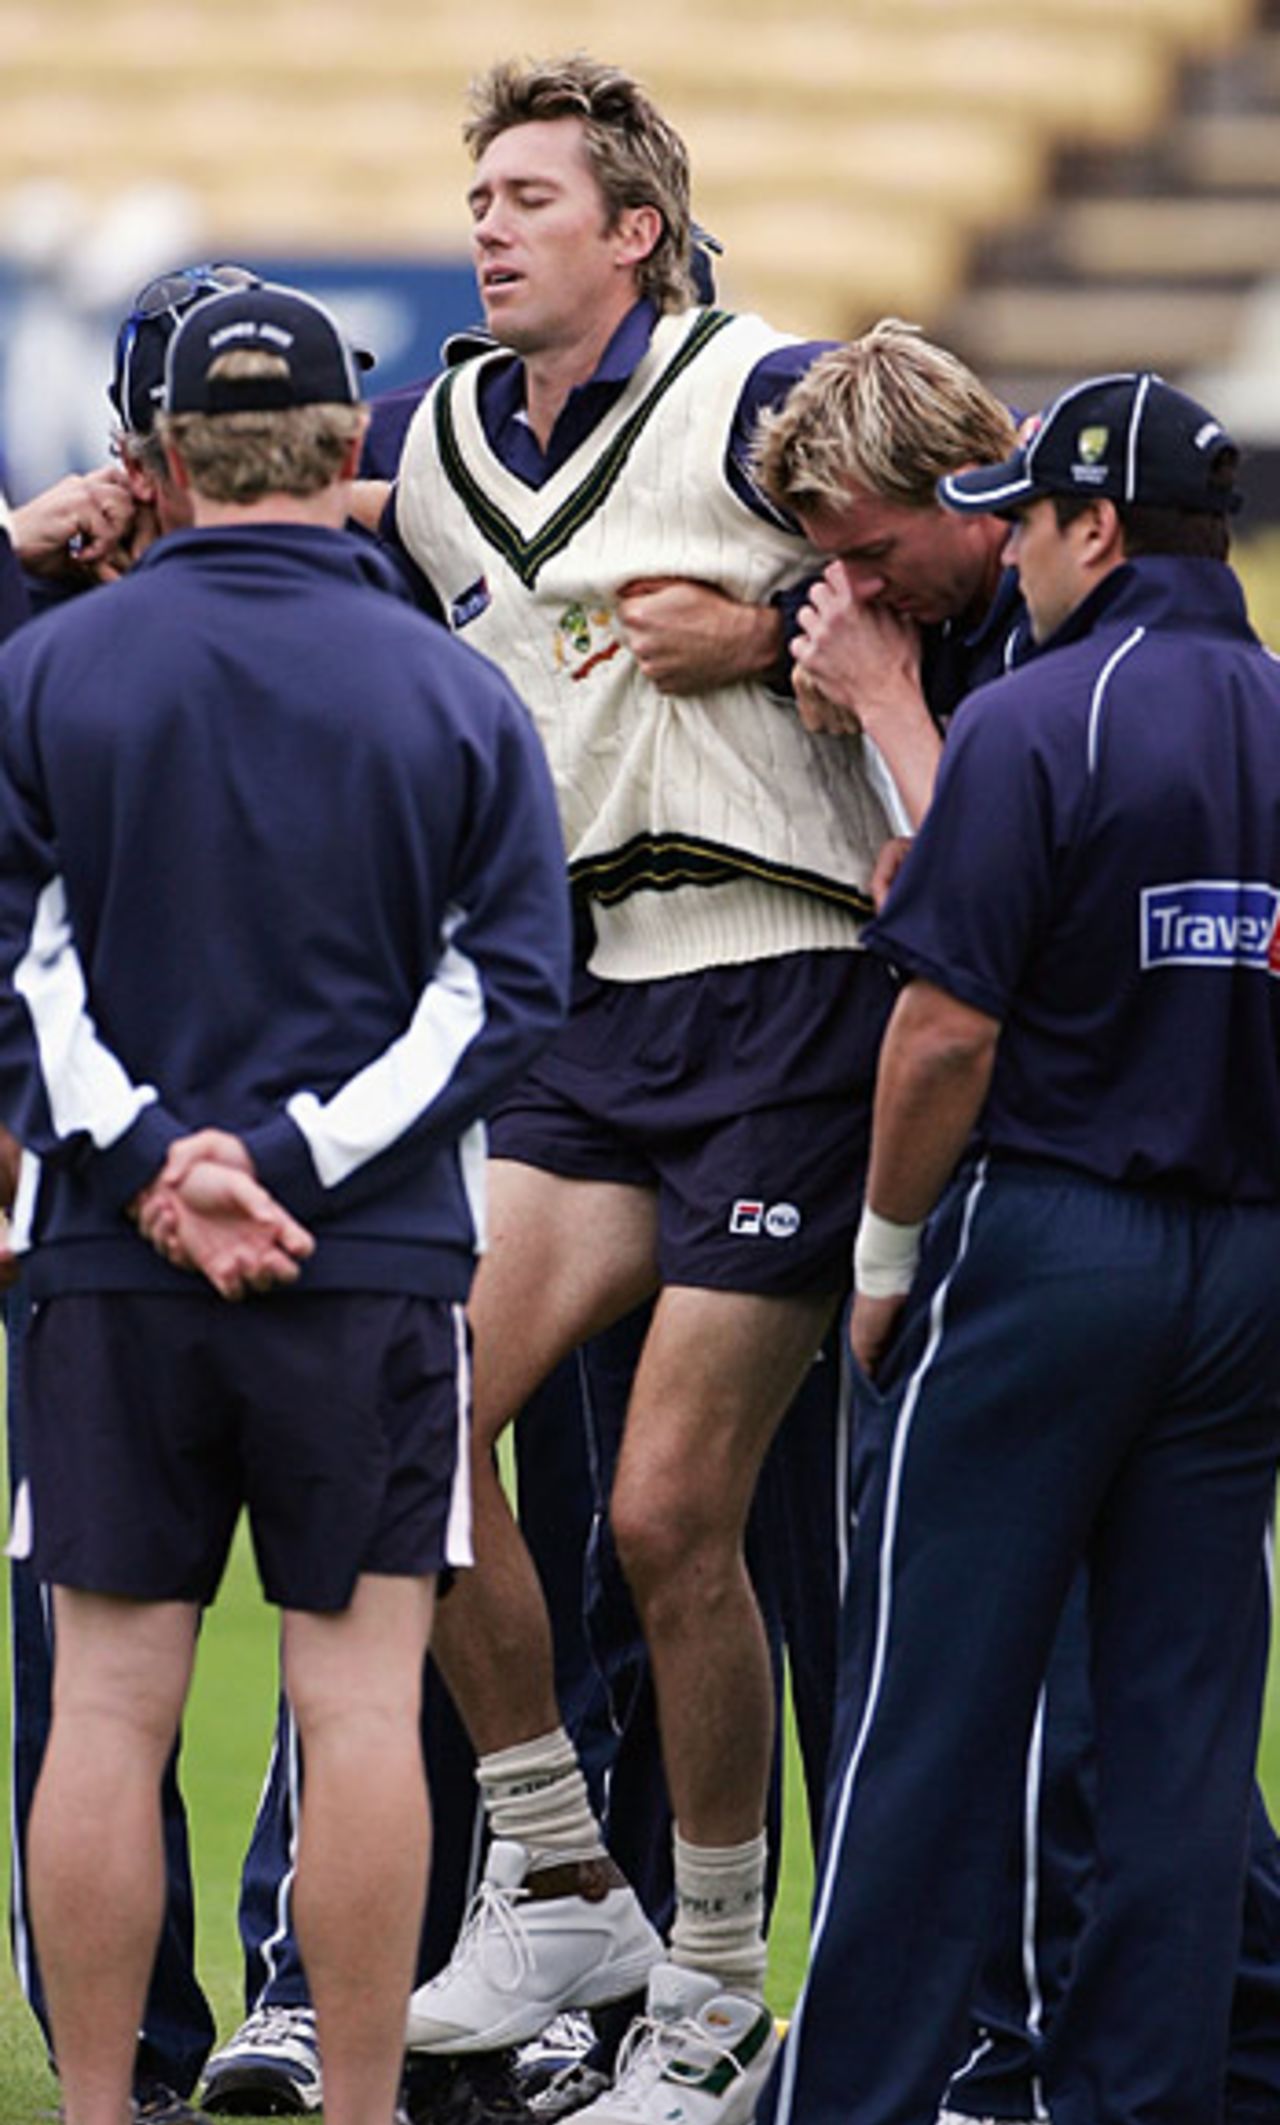 Glenn McGrath is surrounded by concerned team mates after injuring his ankle in a warm-up session, England v Australia, Edgbaston, August 4, 2005